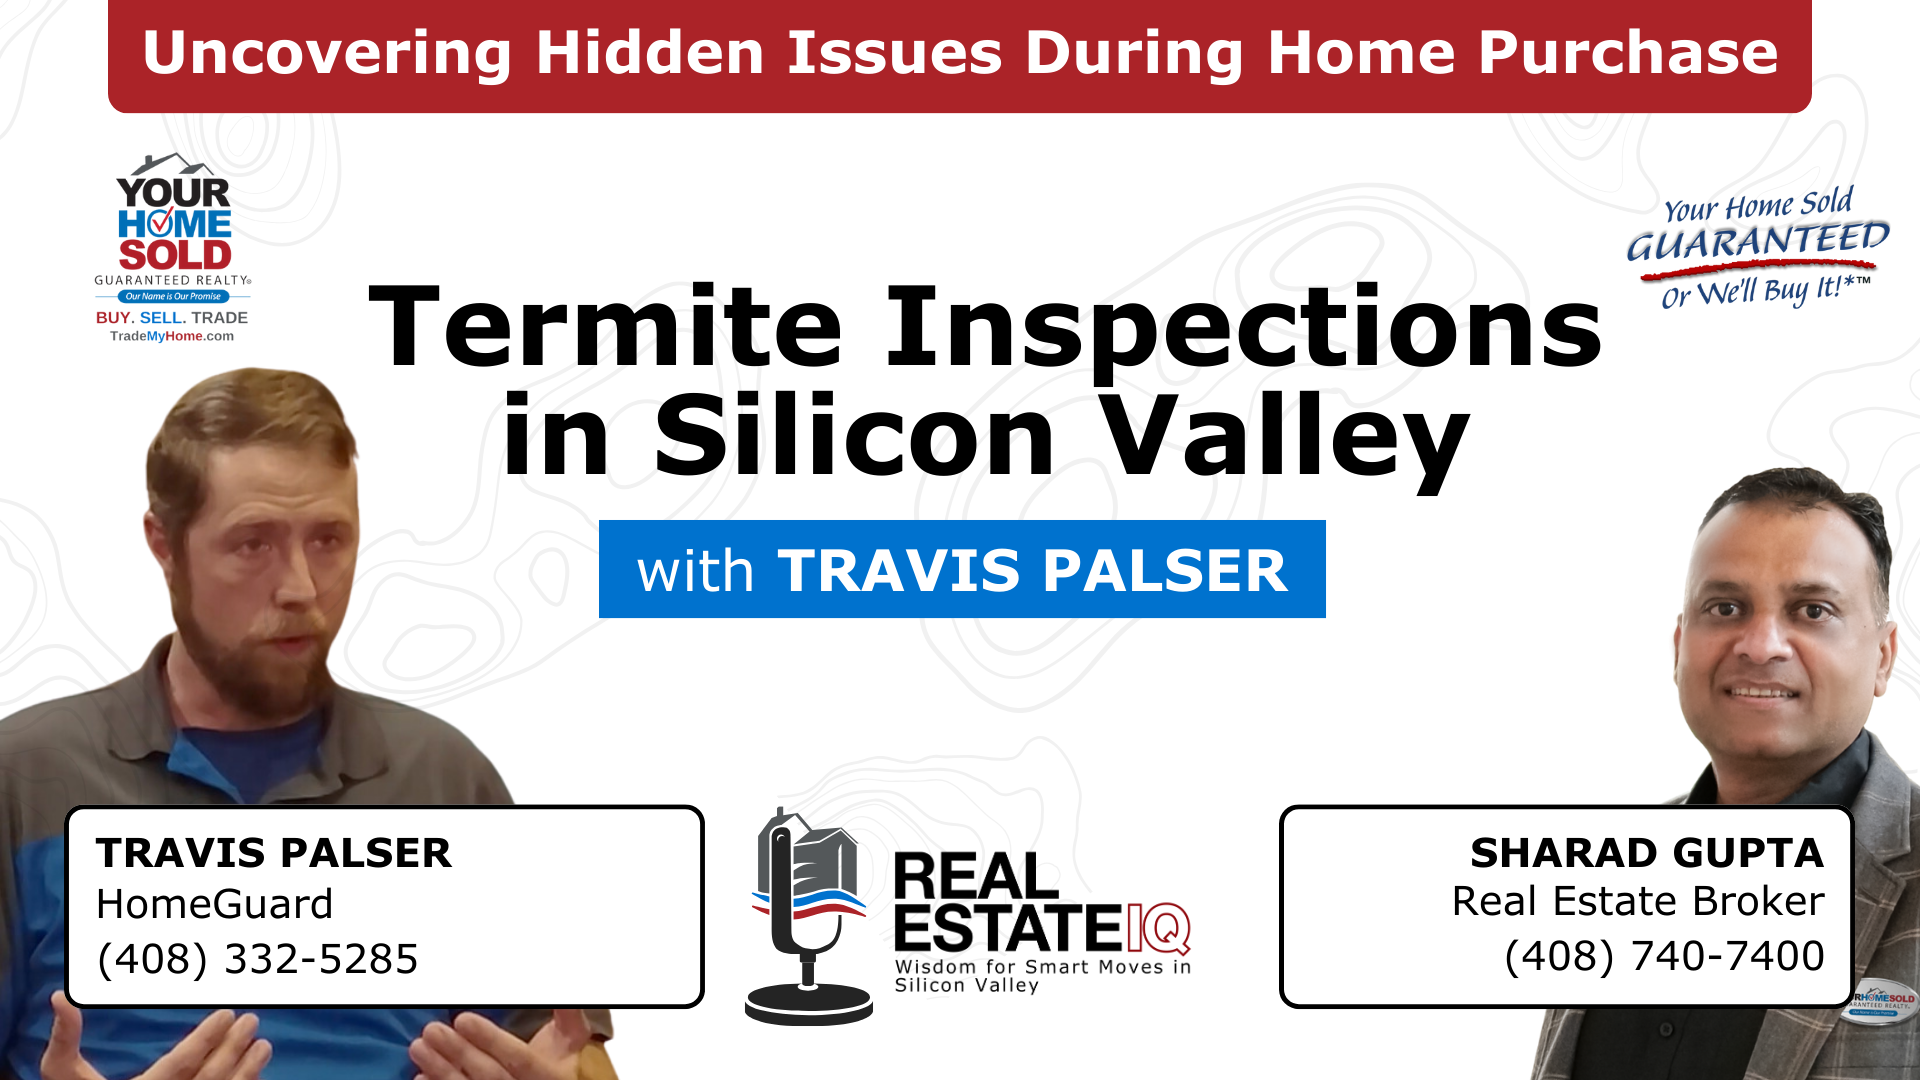 Termite Inspections: Uncovering Hidden Issues During Home Purchase in Silicon Valley Video